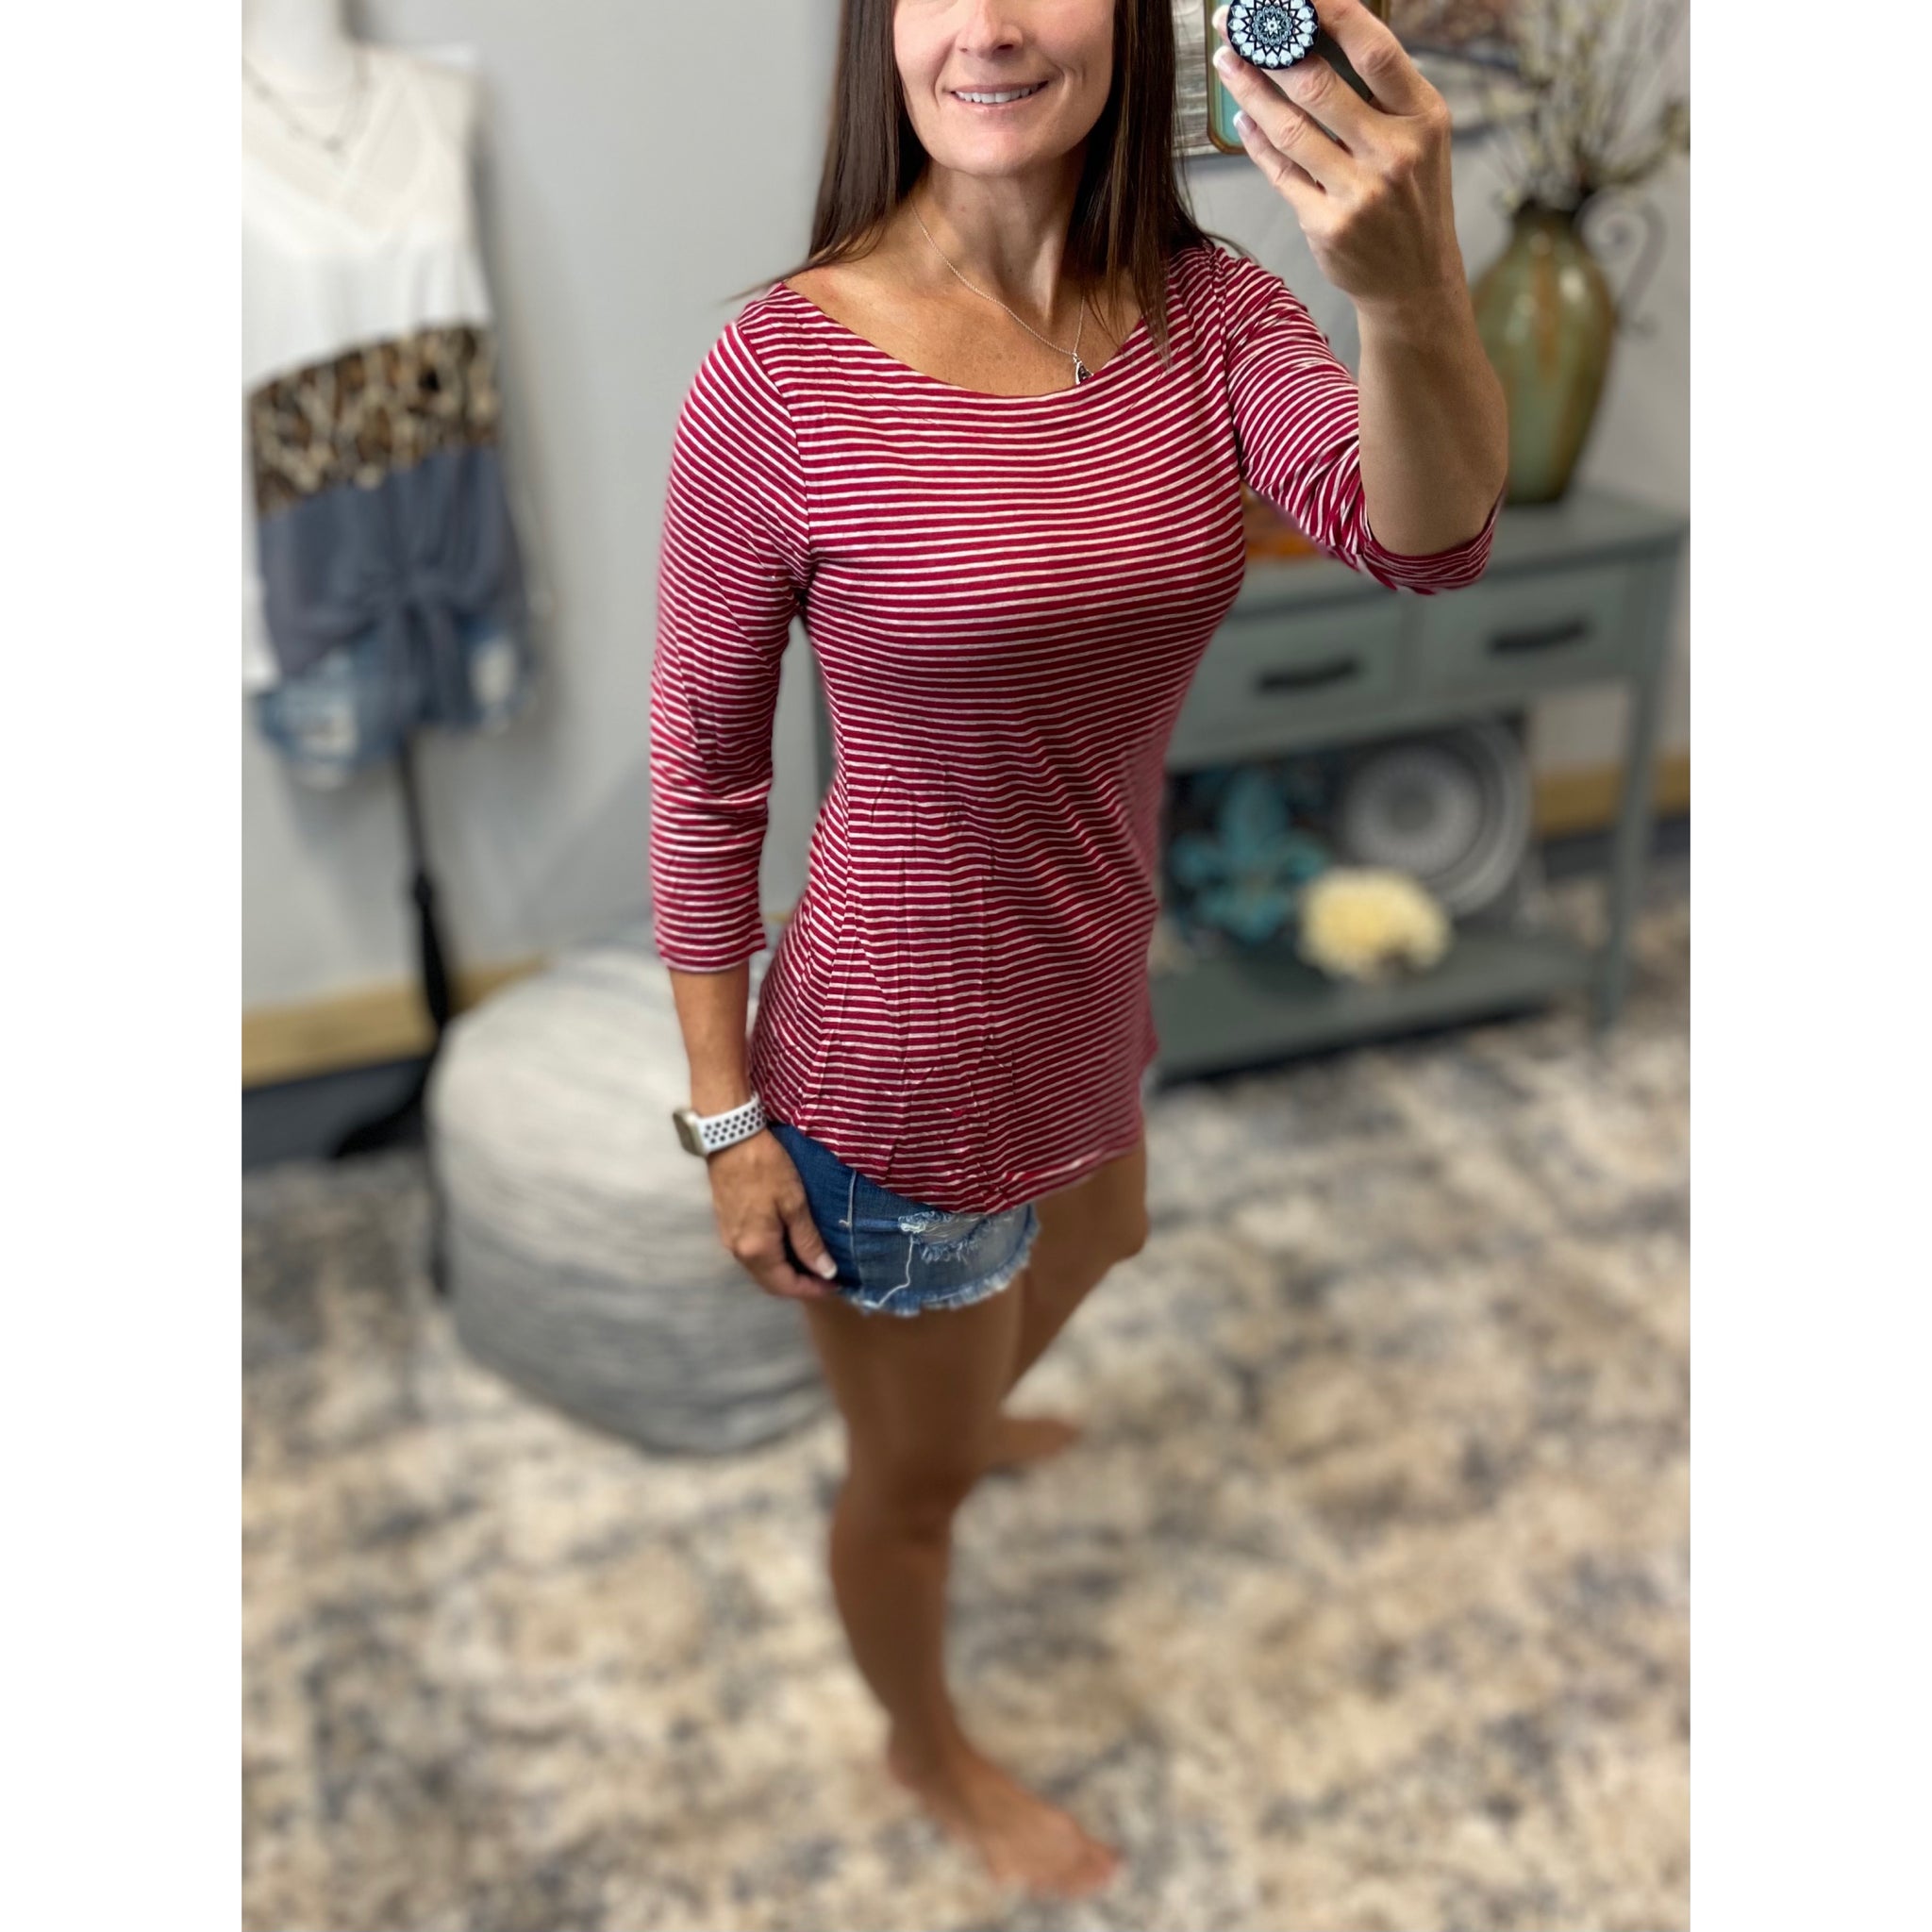 Very Sexy Open Scoop Neck Preppy Striped Rugby Open 3/4 Shirt Top Red Gray S/M/L